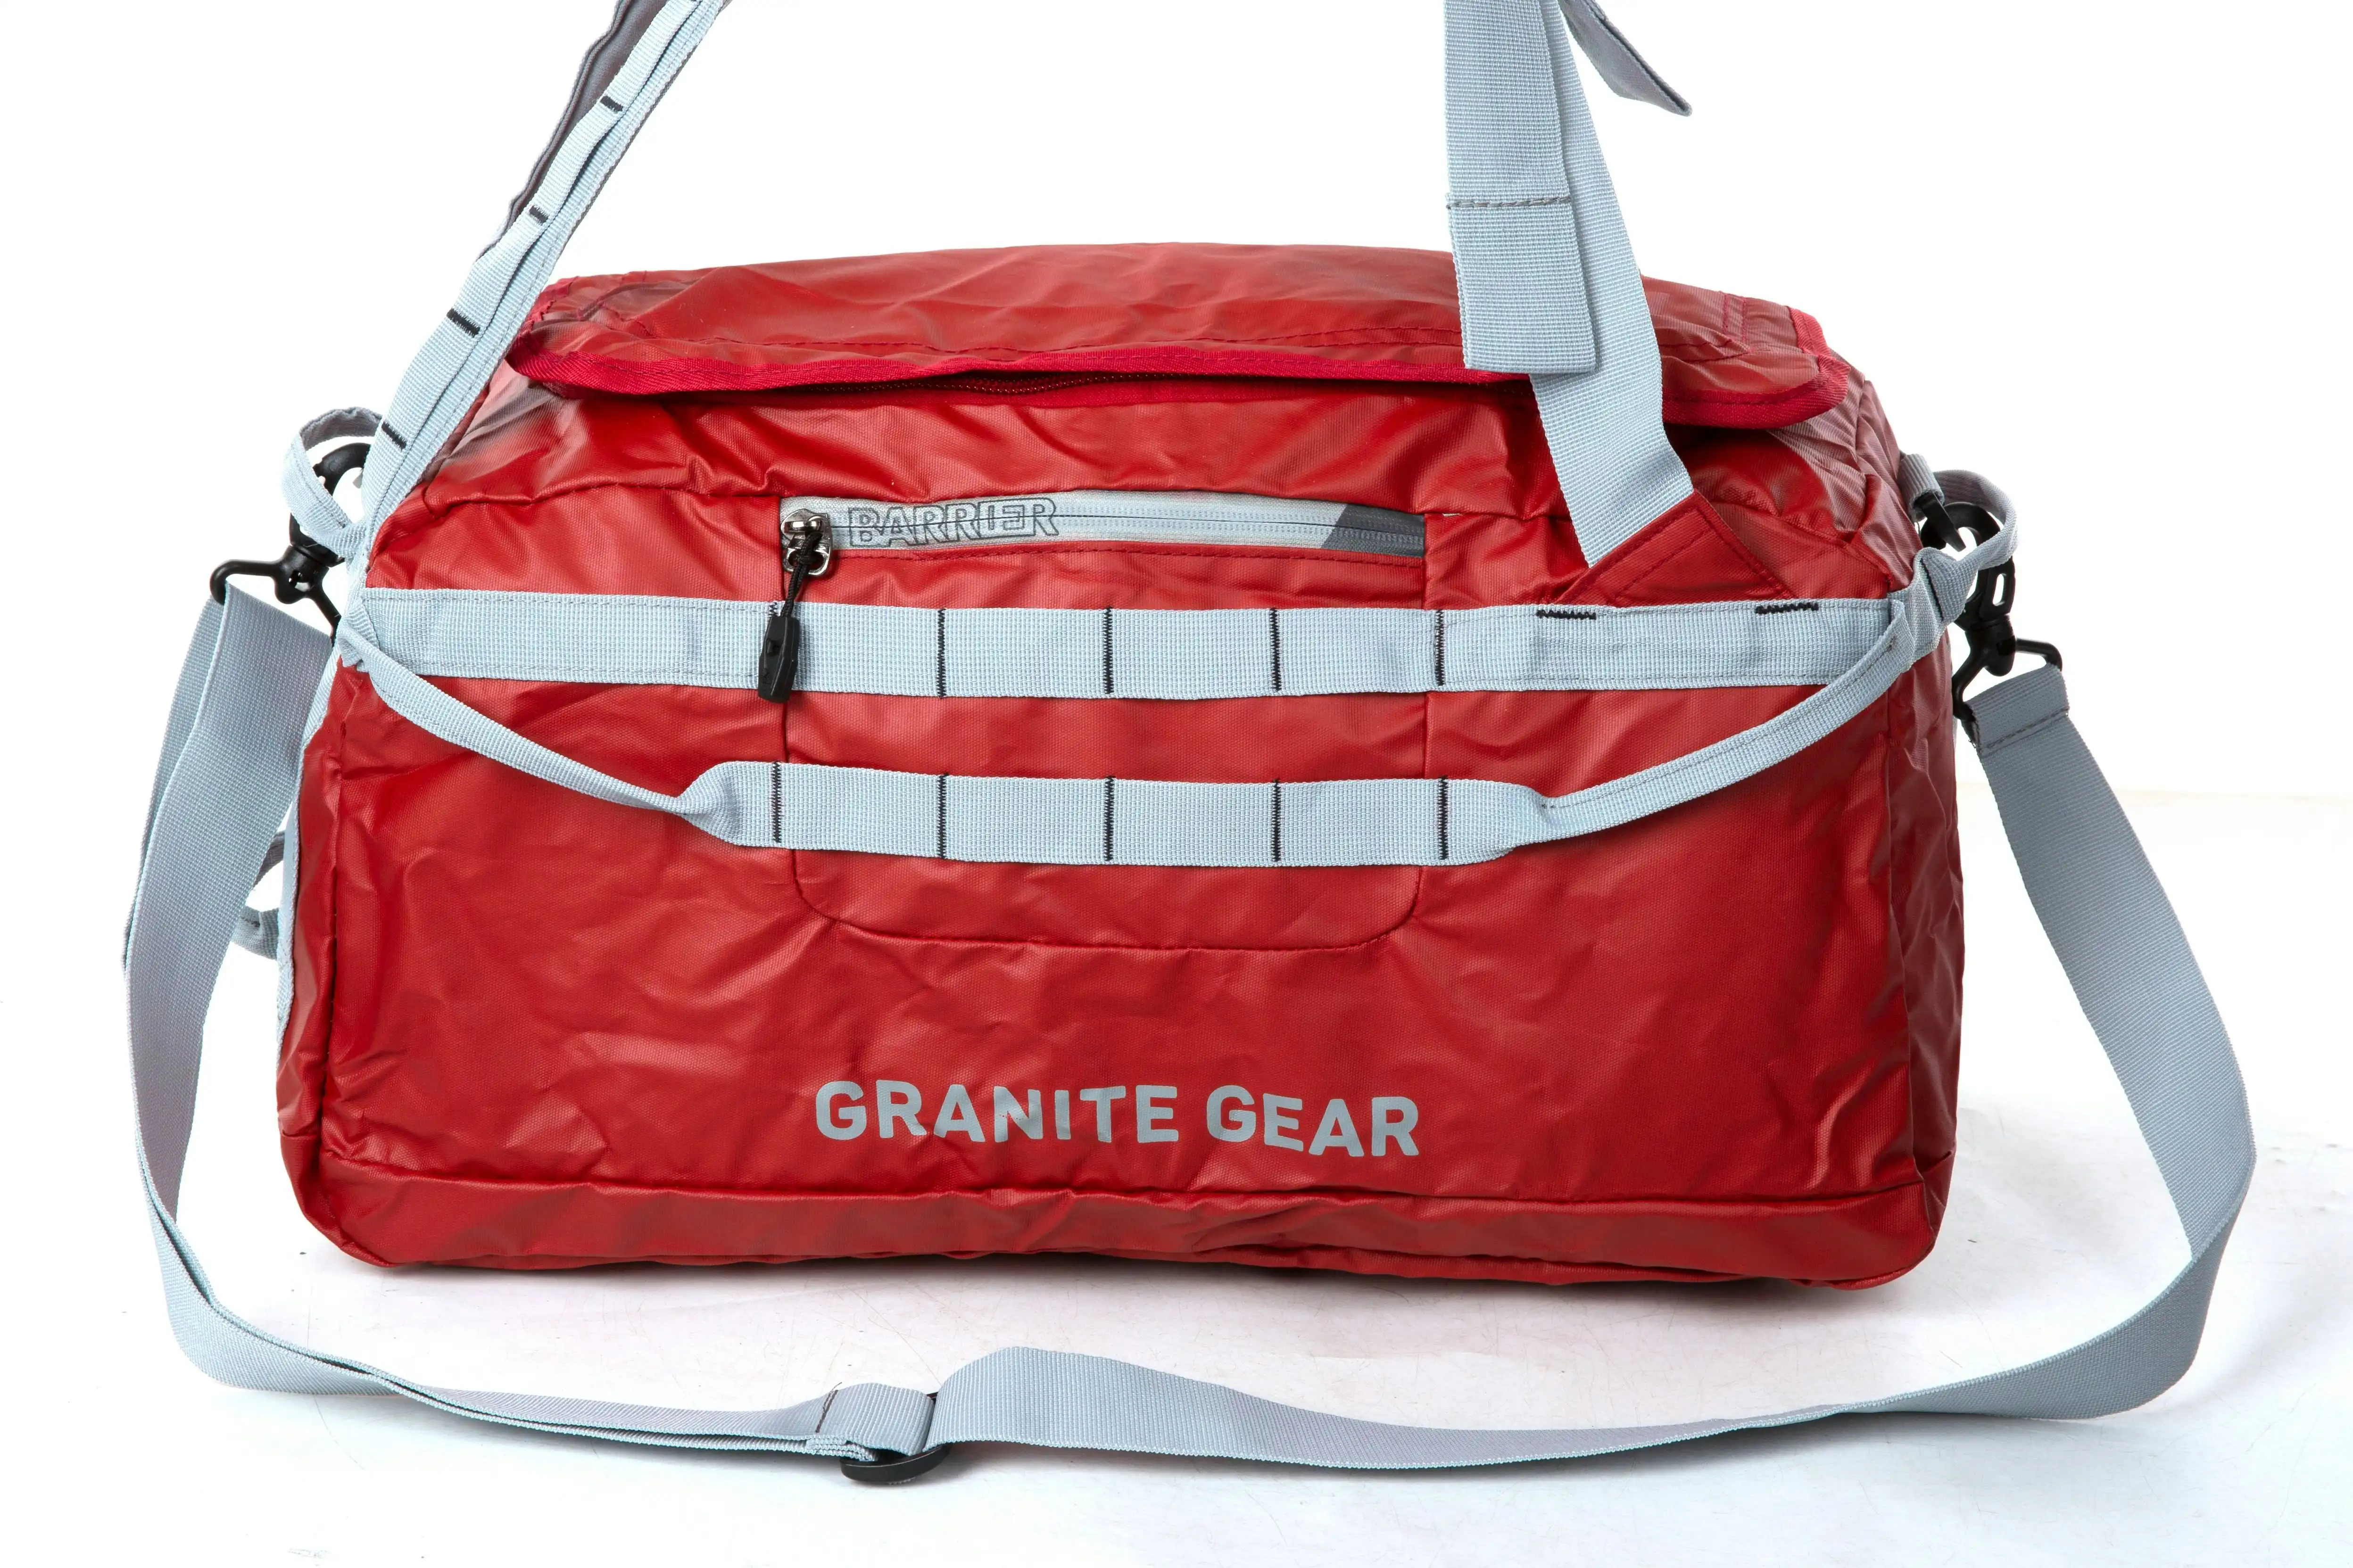 Granite Gear Foldable Duffle Bag With Backpack Strap Sport Gym Duffel Crossbody Camping Hiking Bag G5035 Red